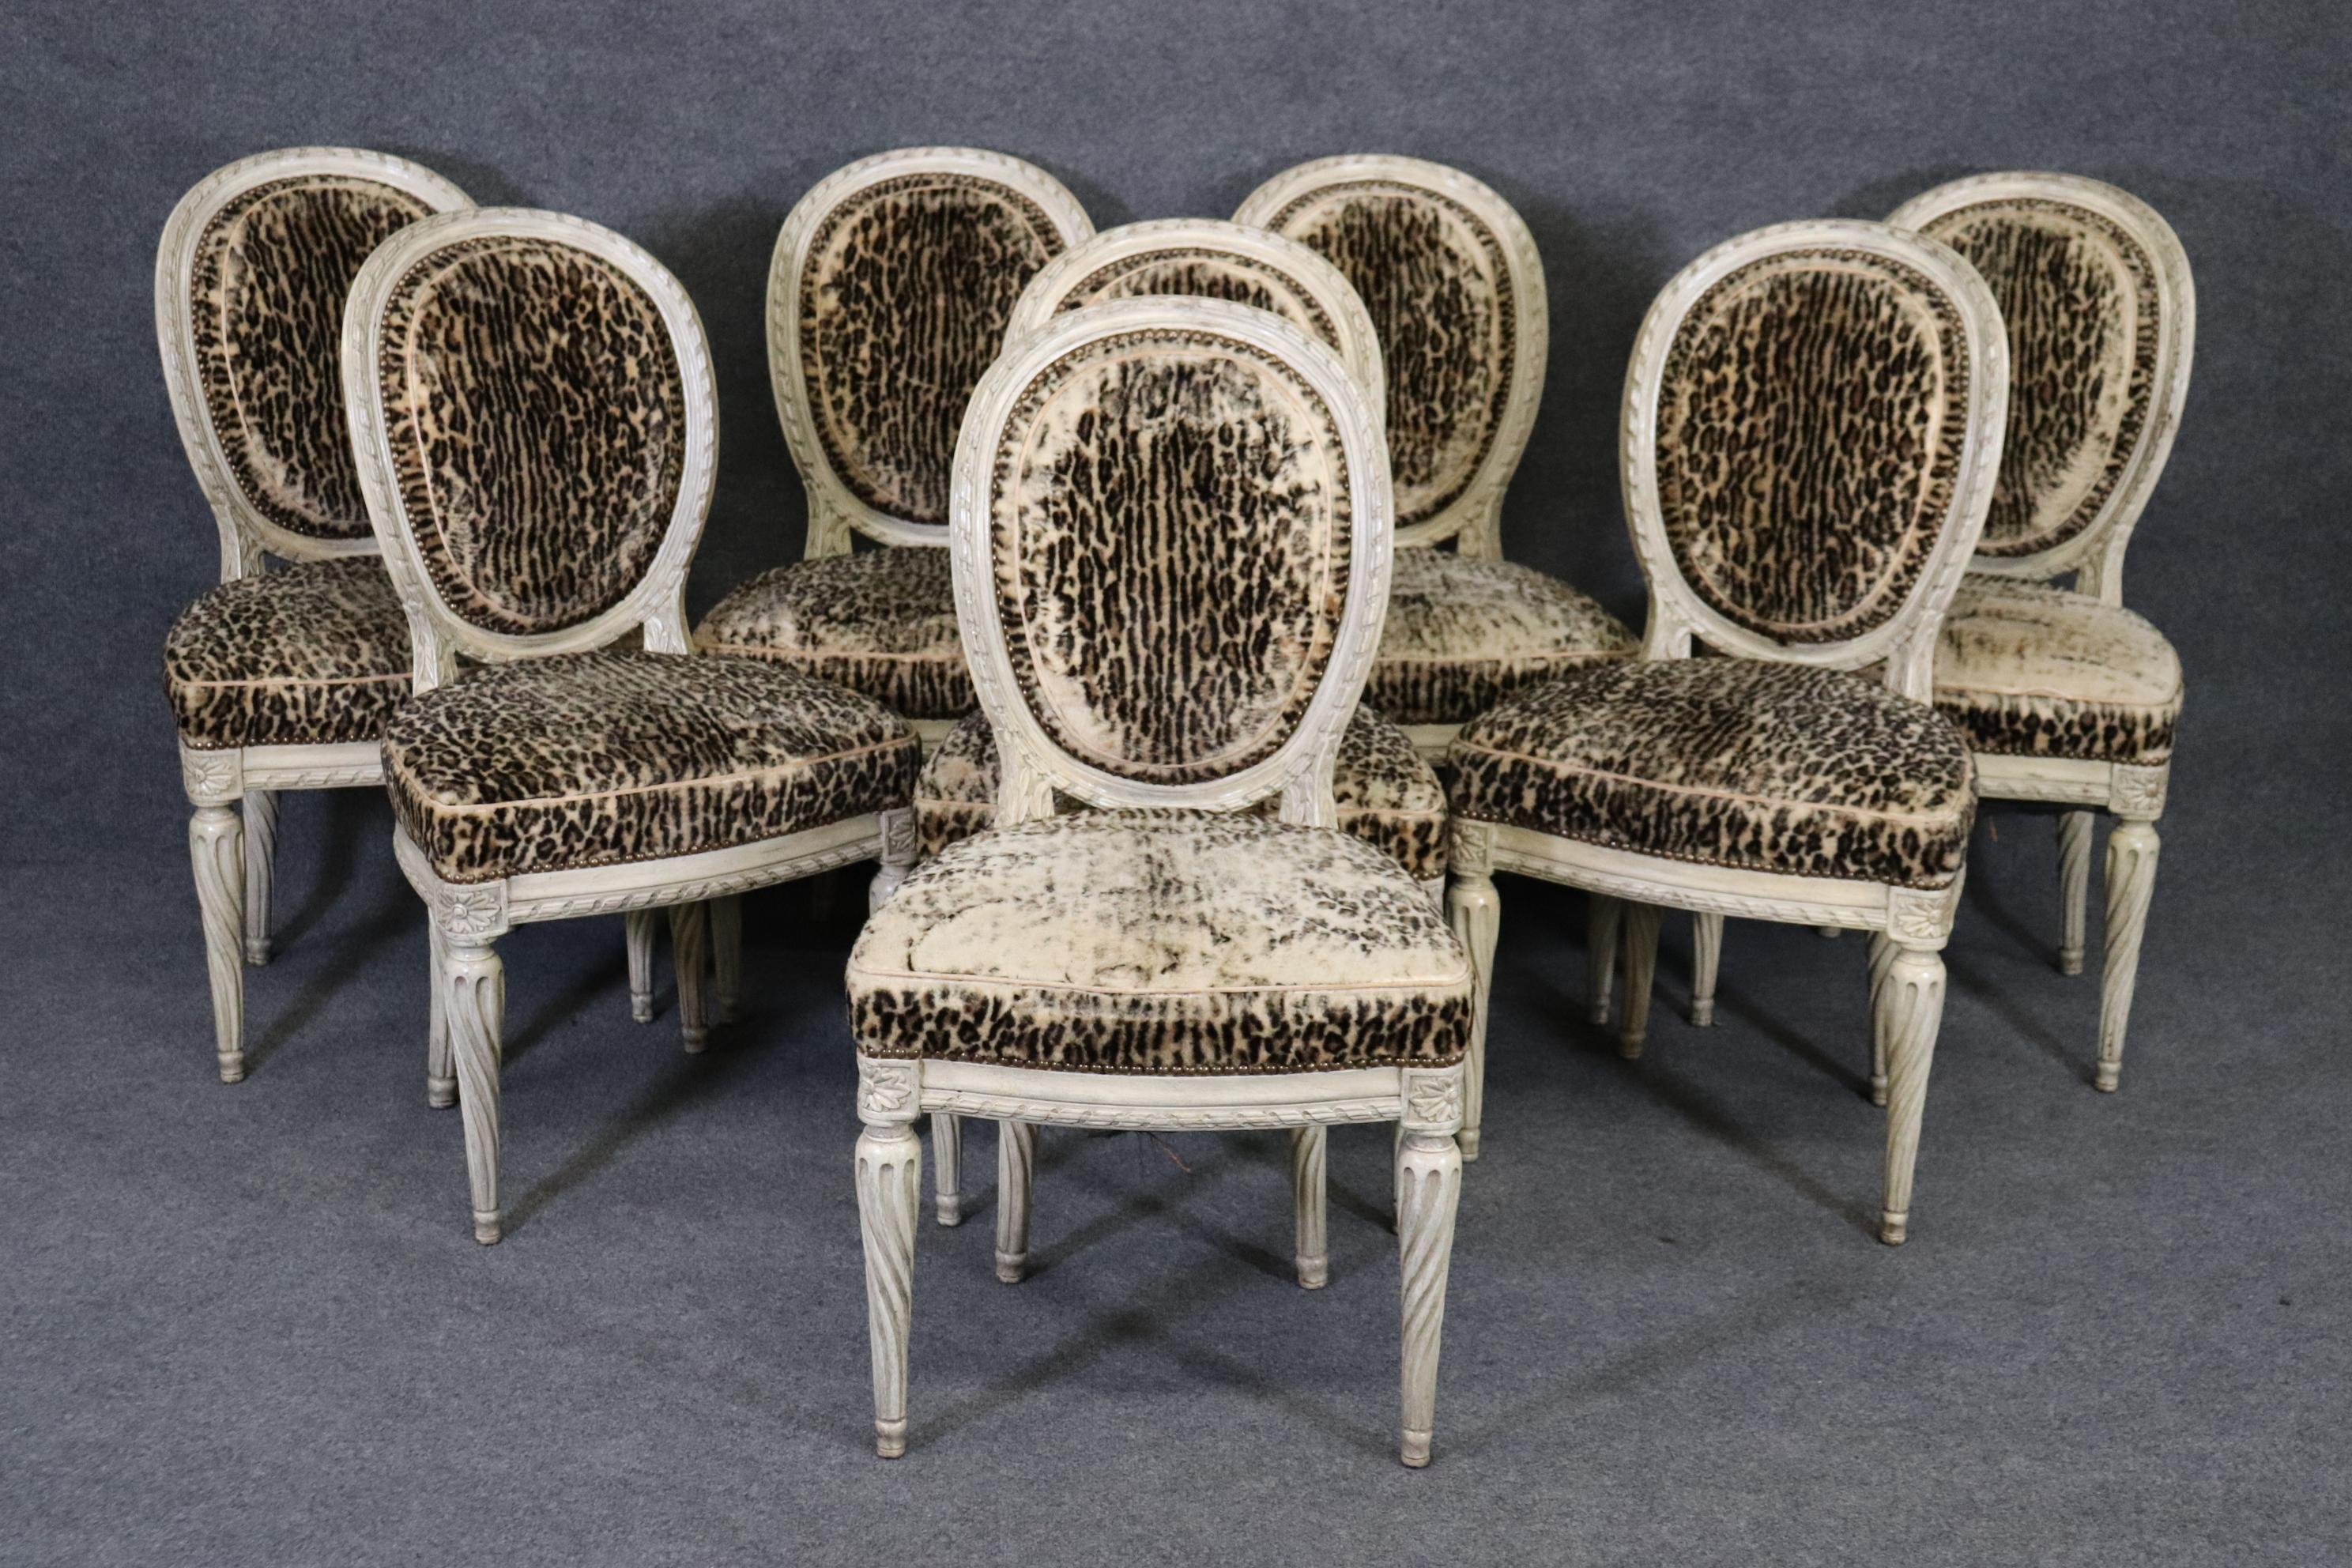 This is an extraordinary set of 1940s era French-made Louis XVI or Directoire dining chairs. The chairs are in their original antique-white paint and feature gorgeous time-worn original leopard print upholstery. The upholstery is 80 years old and